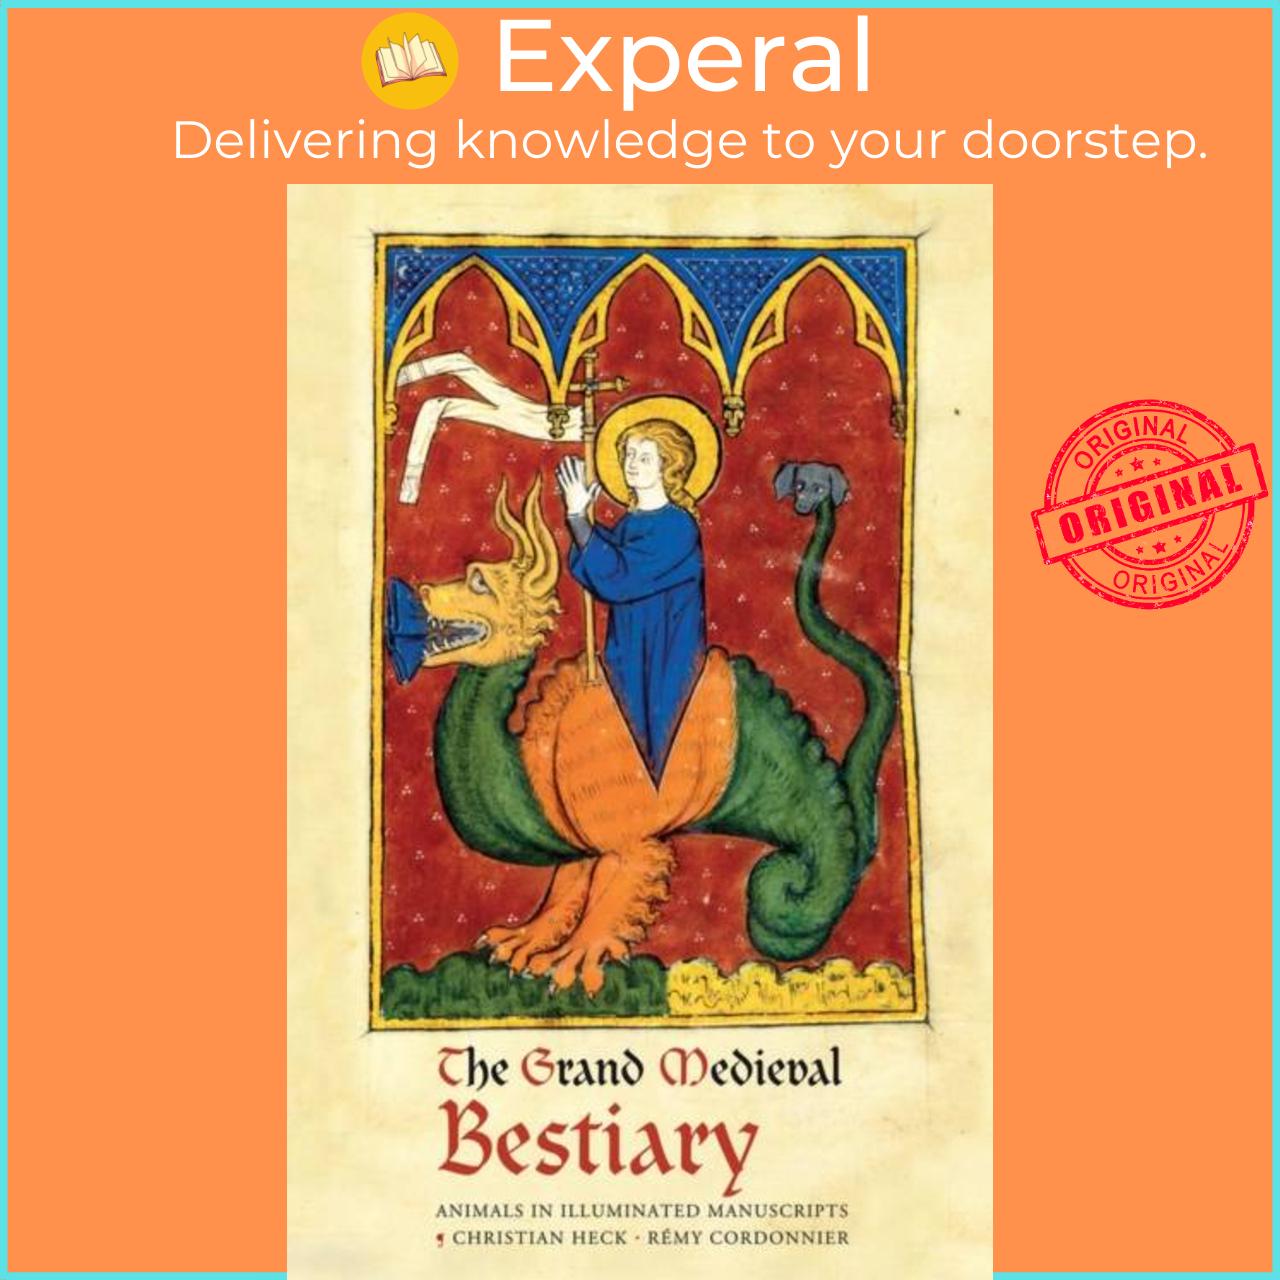 Sách - The Grand Medieval Bestiary (Dragonet Edition) - Animals in Illuminated by Christian Heck (UK edition, hardcover)